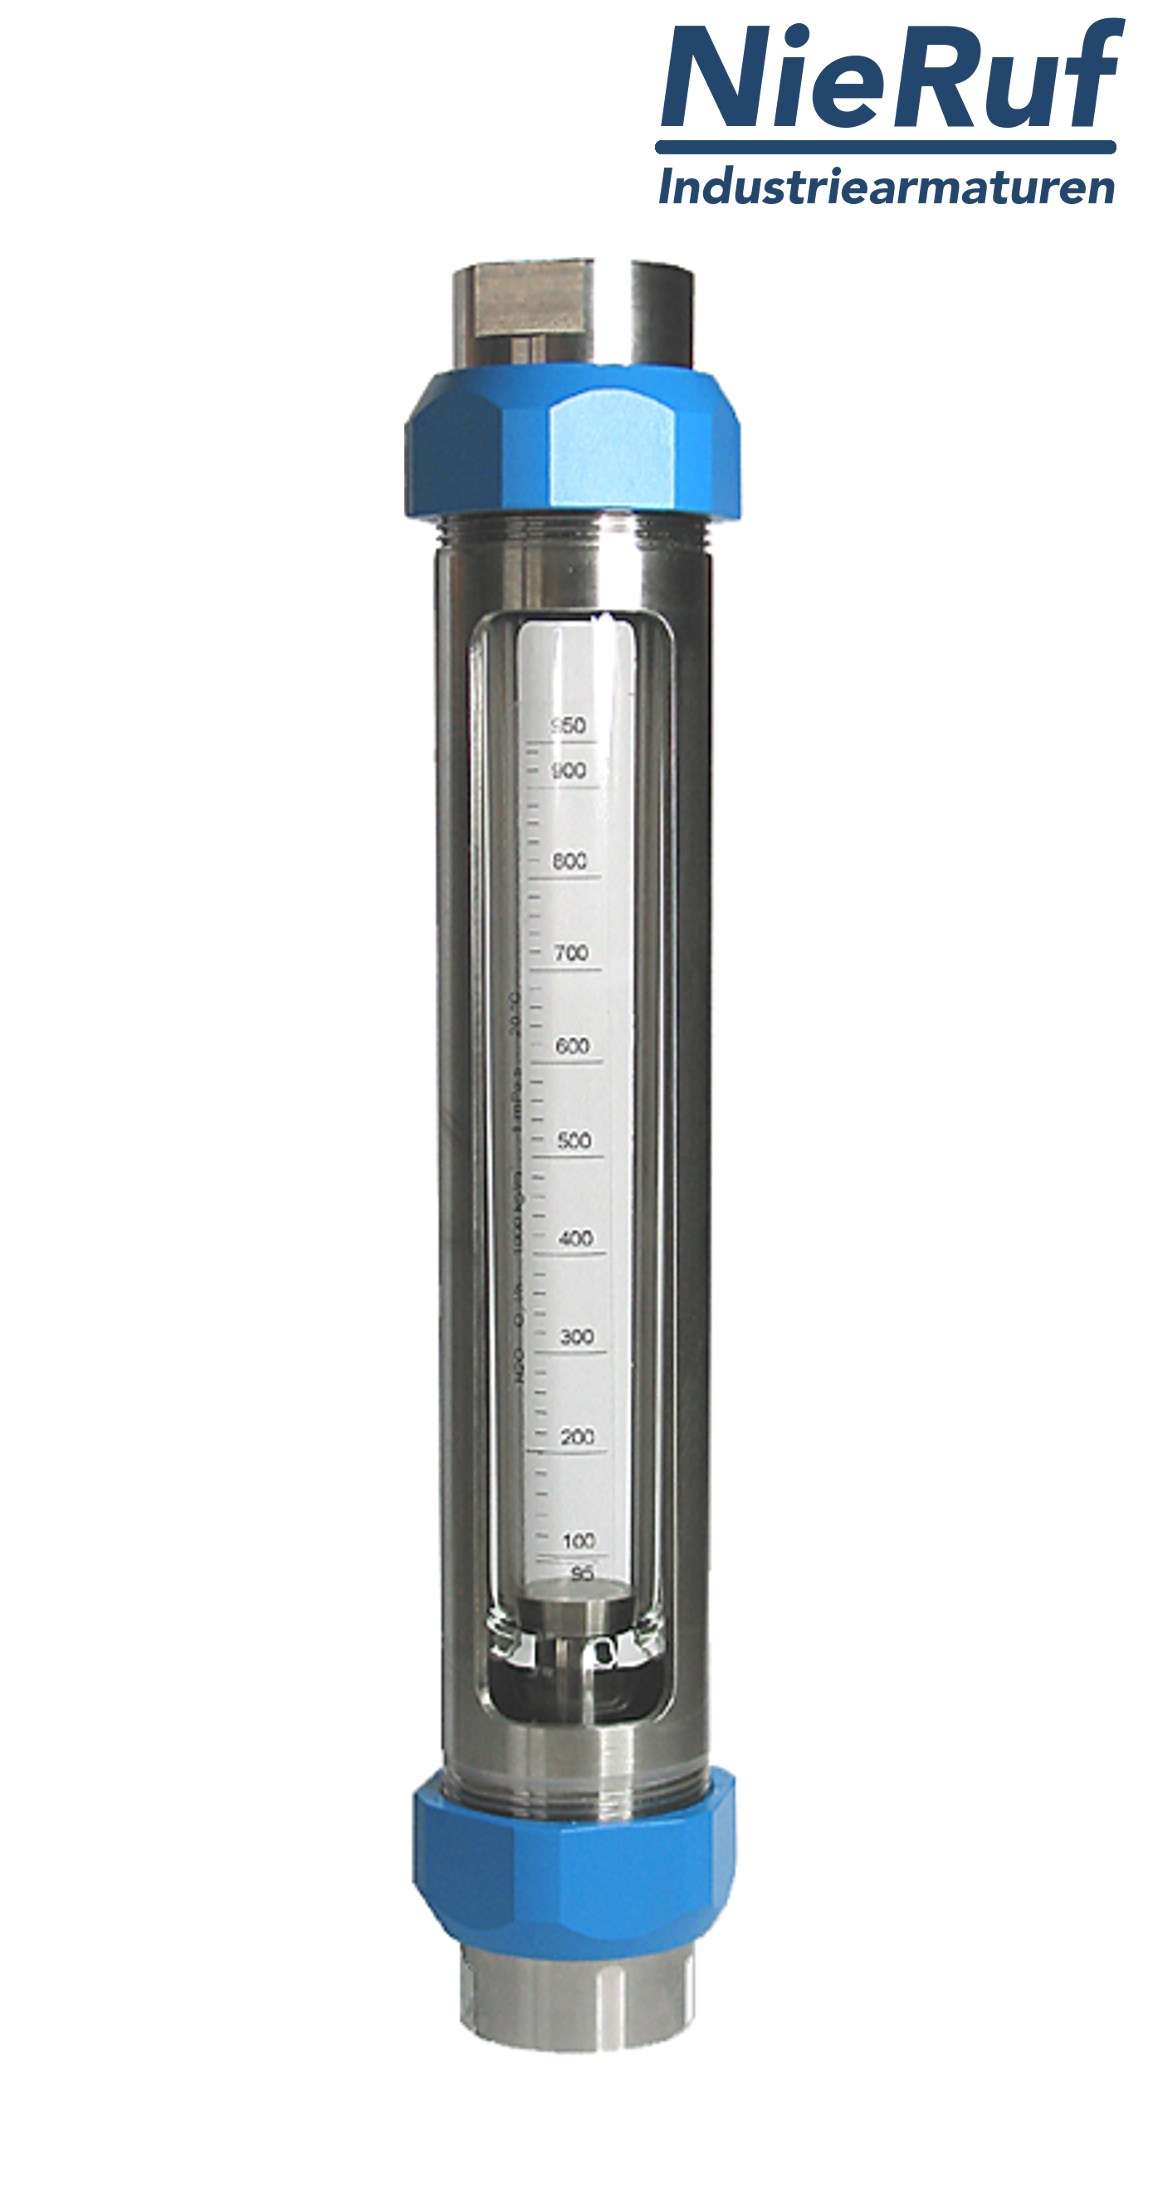 Variable area flowmeter stainless steel + borosilicate 2" inch 16000.0 - 160000.0 l/h air FKM